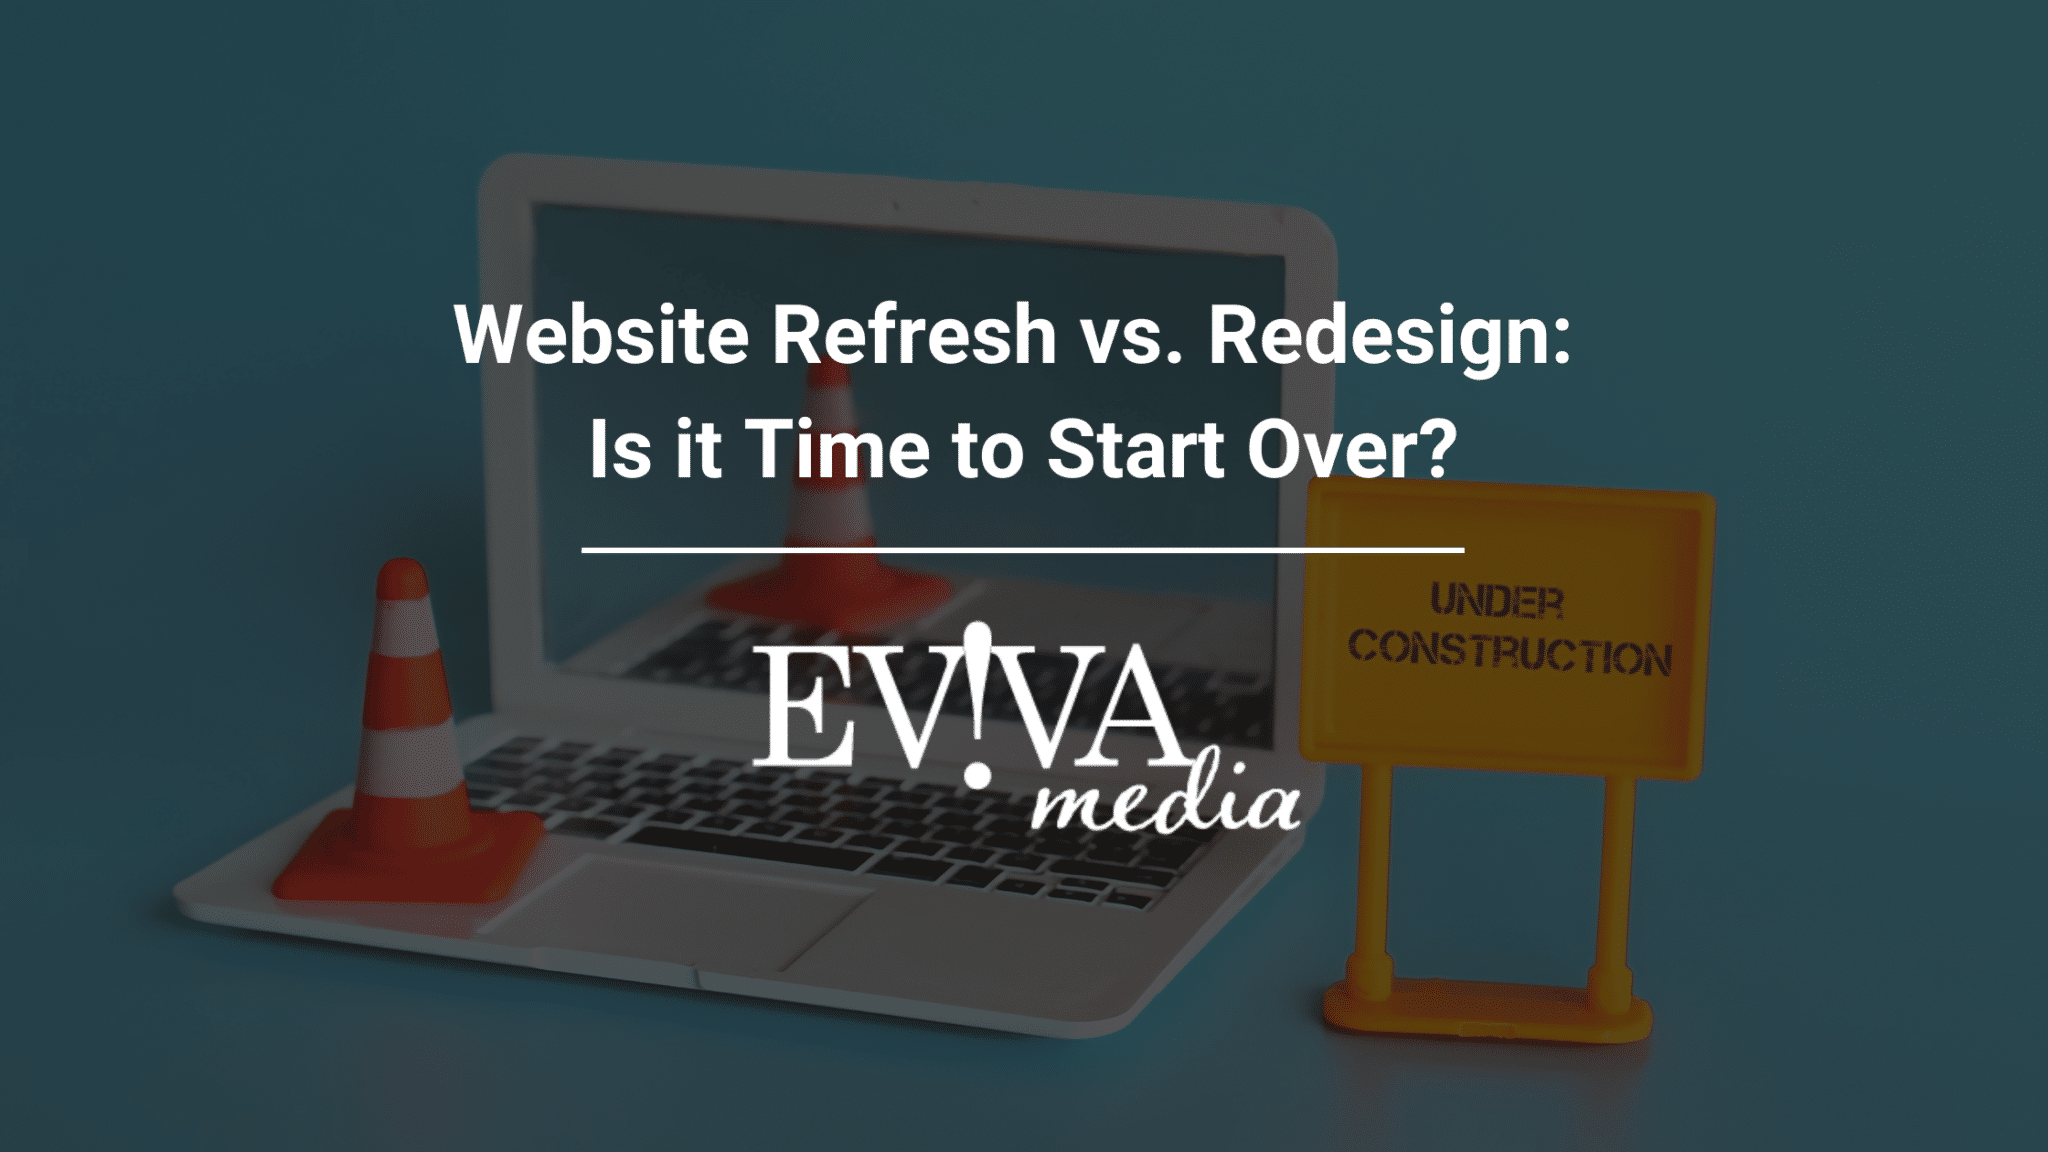 A laptop displaying "Website Refresh vs. Redesign: Is it Time to Start Over?" with a traffic cone and "Under Construction" sign on the keyboard and a white Eviva Media logo.